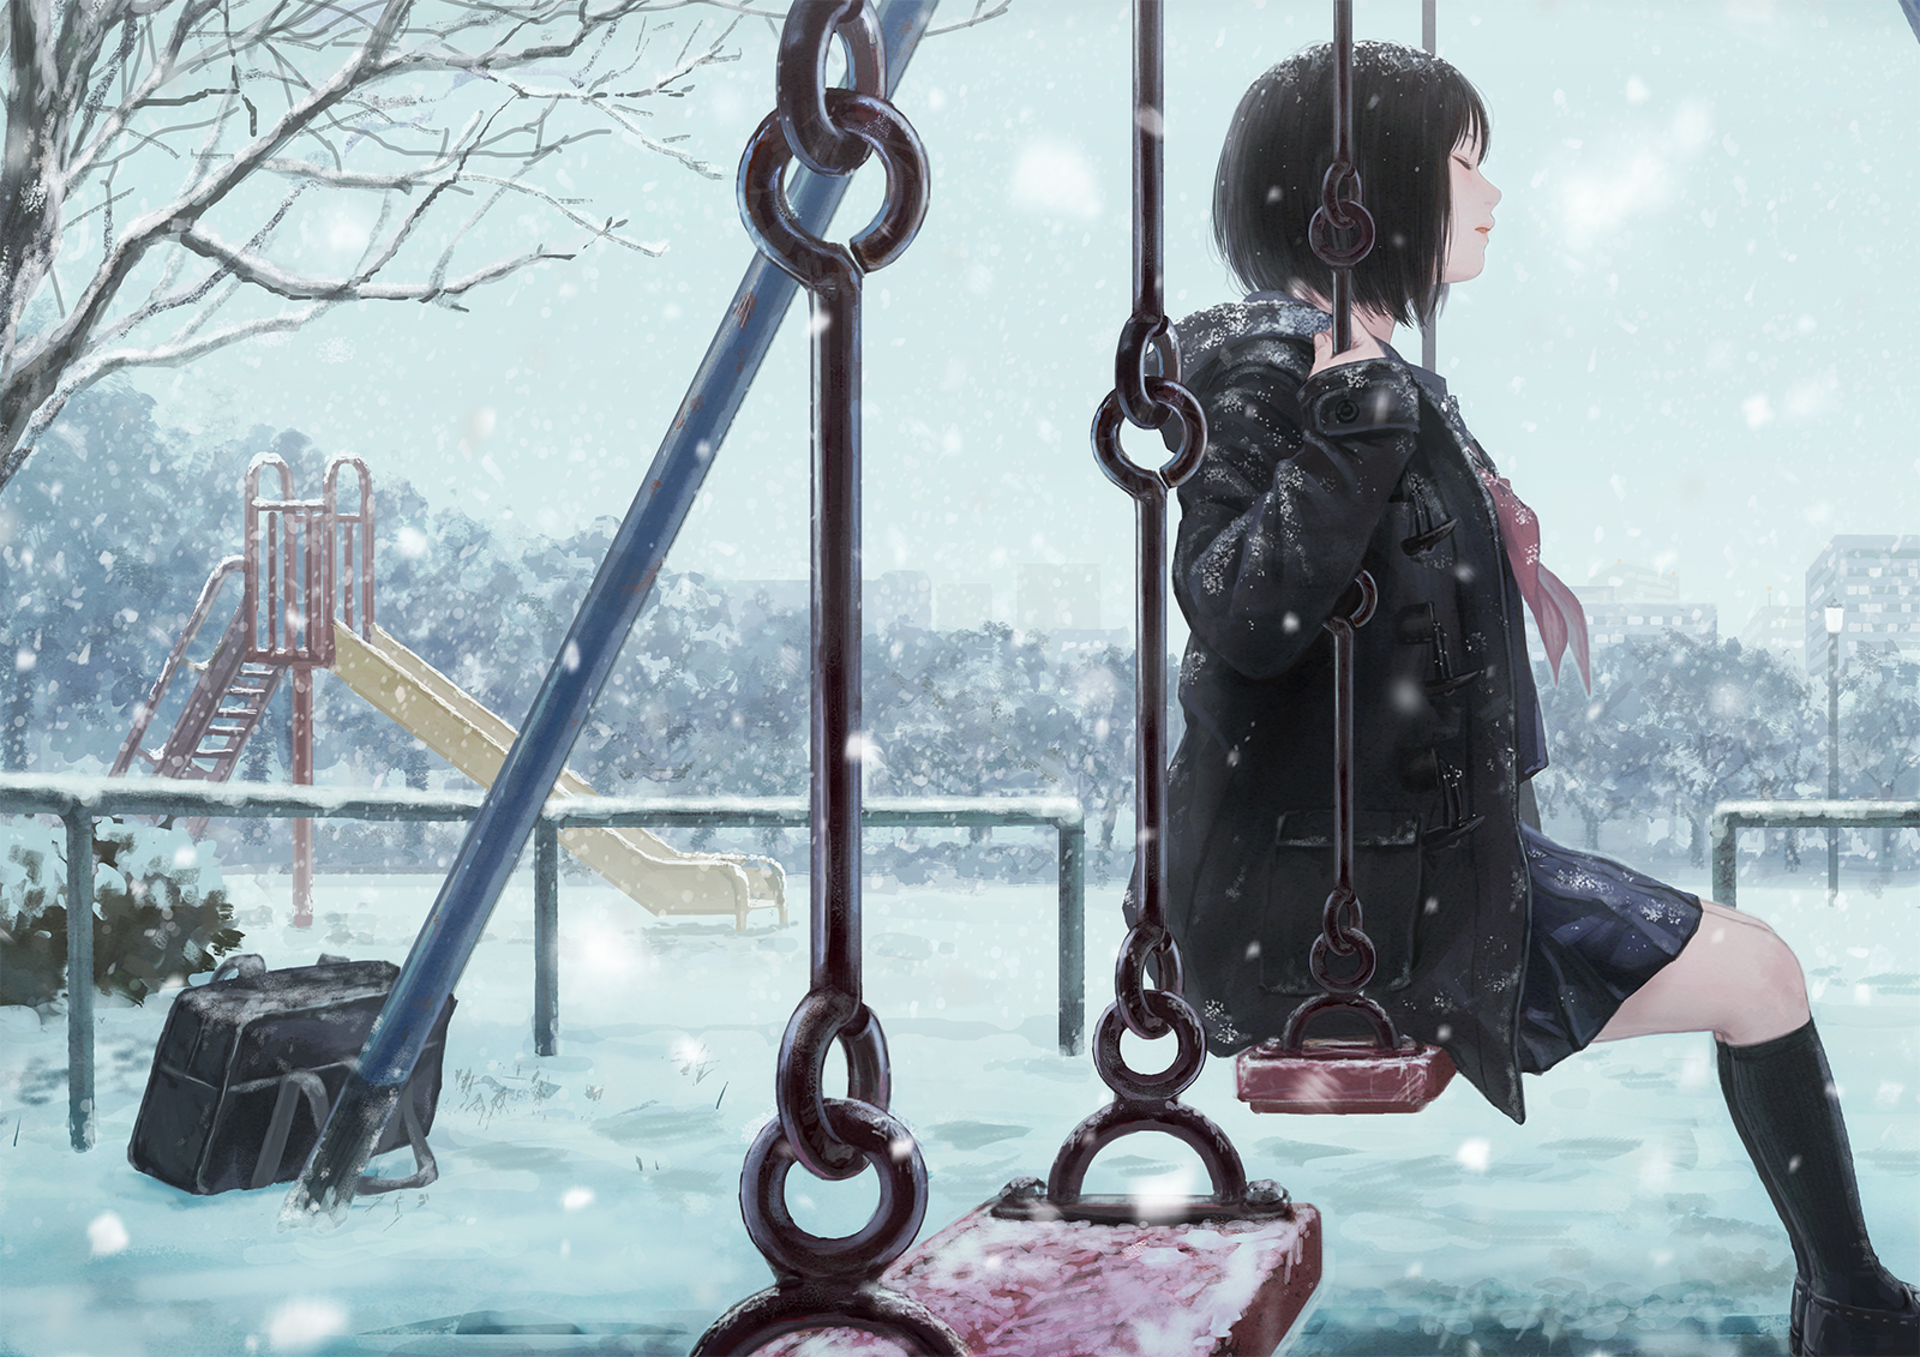 Anime girl on a swing on a calm winter day by romiy HD Wallpaper